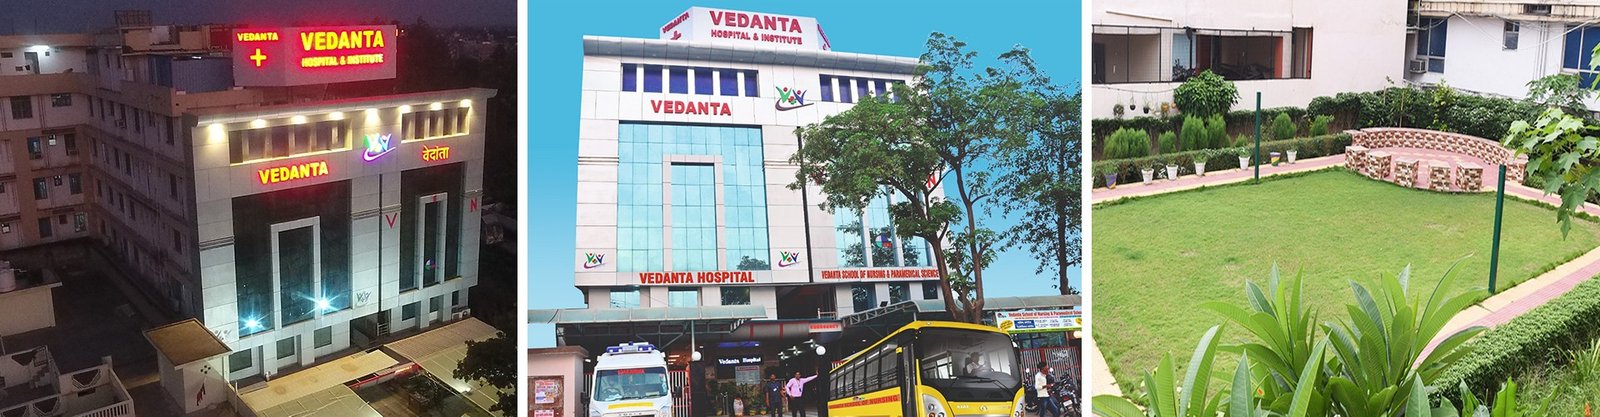 Vedanta Building and Park